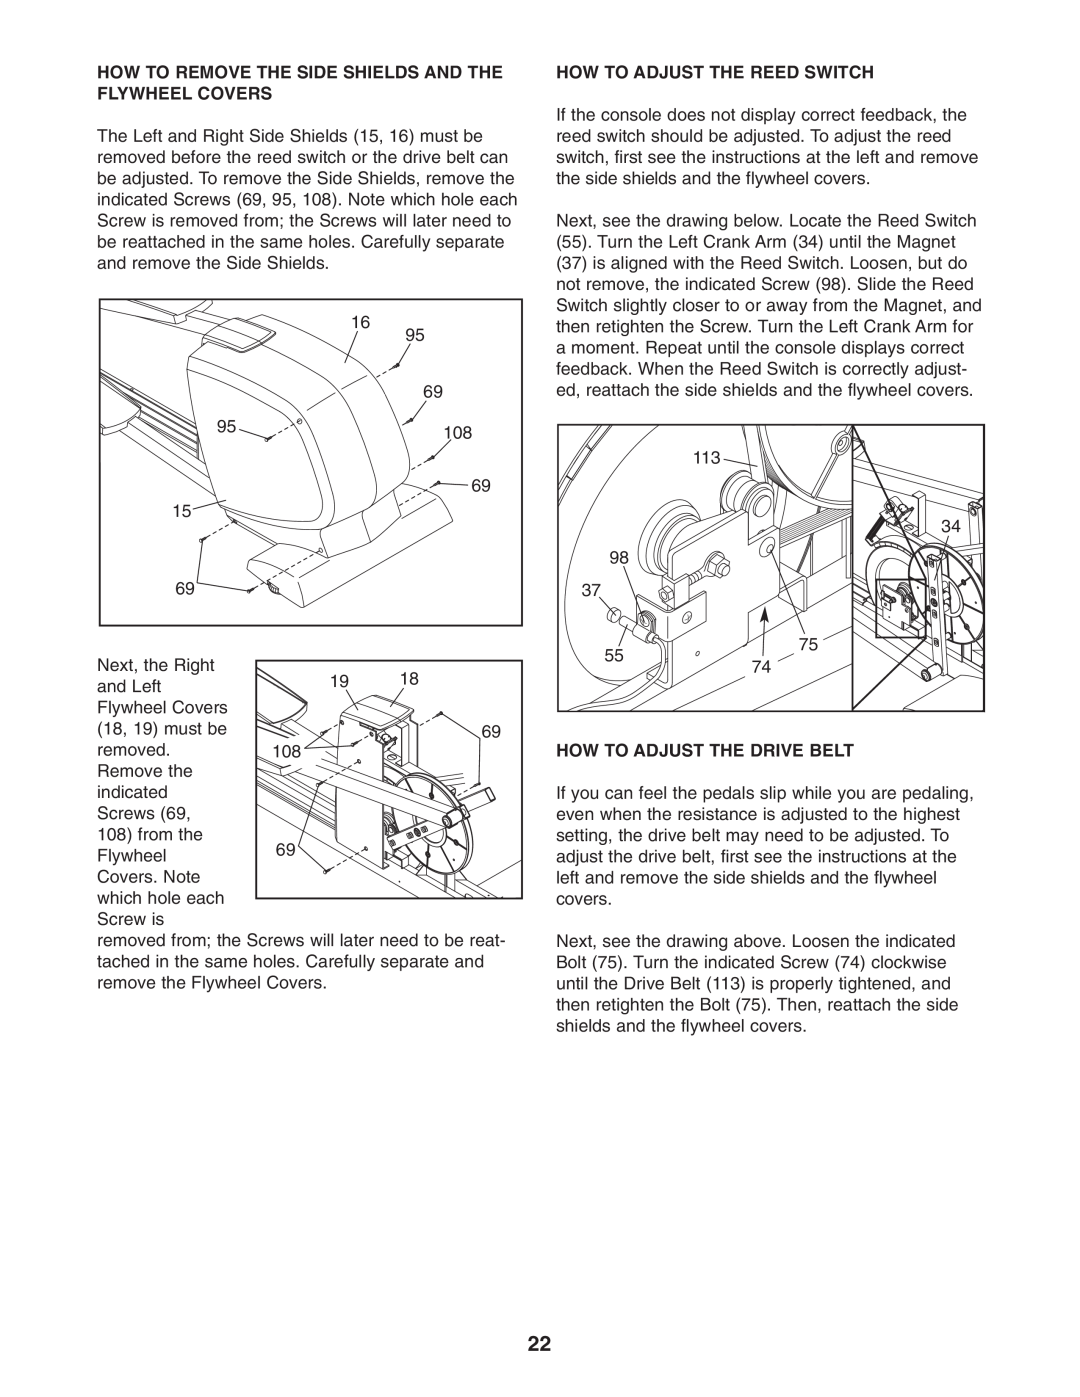 NordicTrack NEL7095.1 user manual How To Remove The Side Shields And The Flywheel Covers, How To Adjust The Reed Switch 